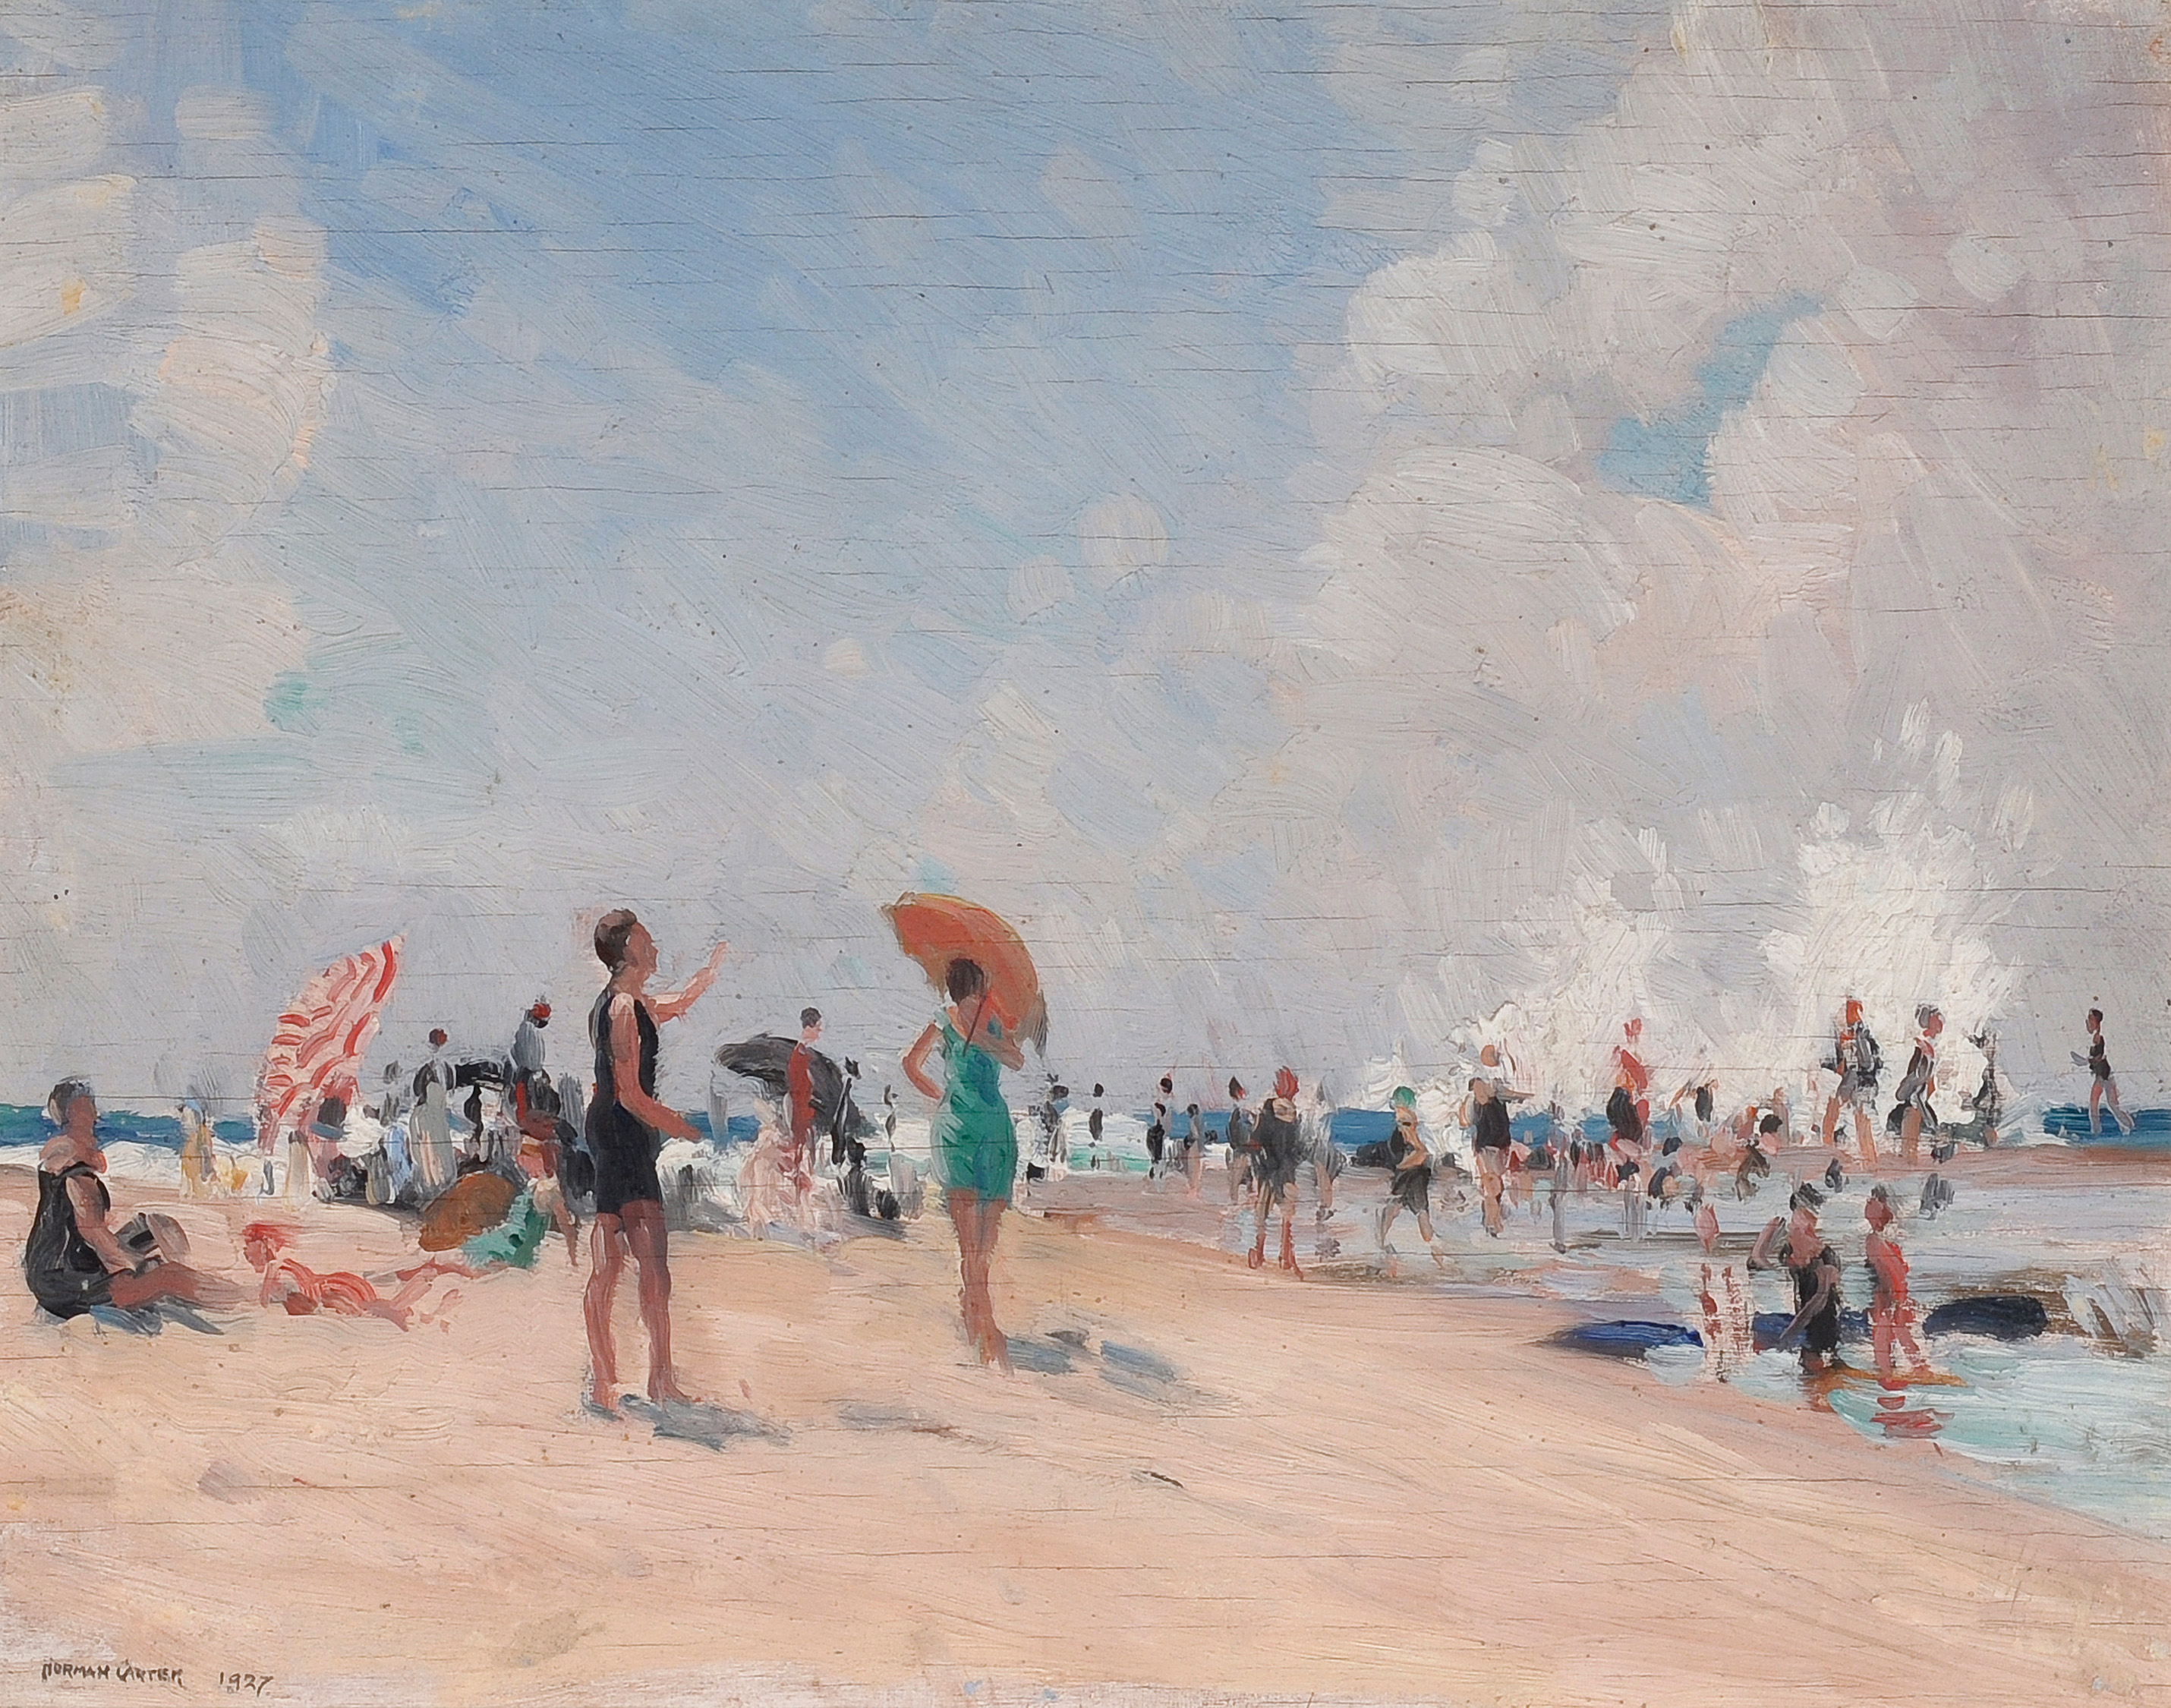 A 1927 painting of people at the beach by artist Norman Carter.